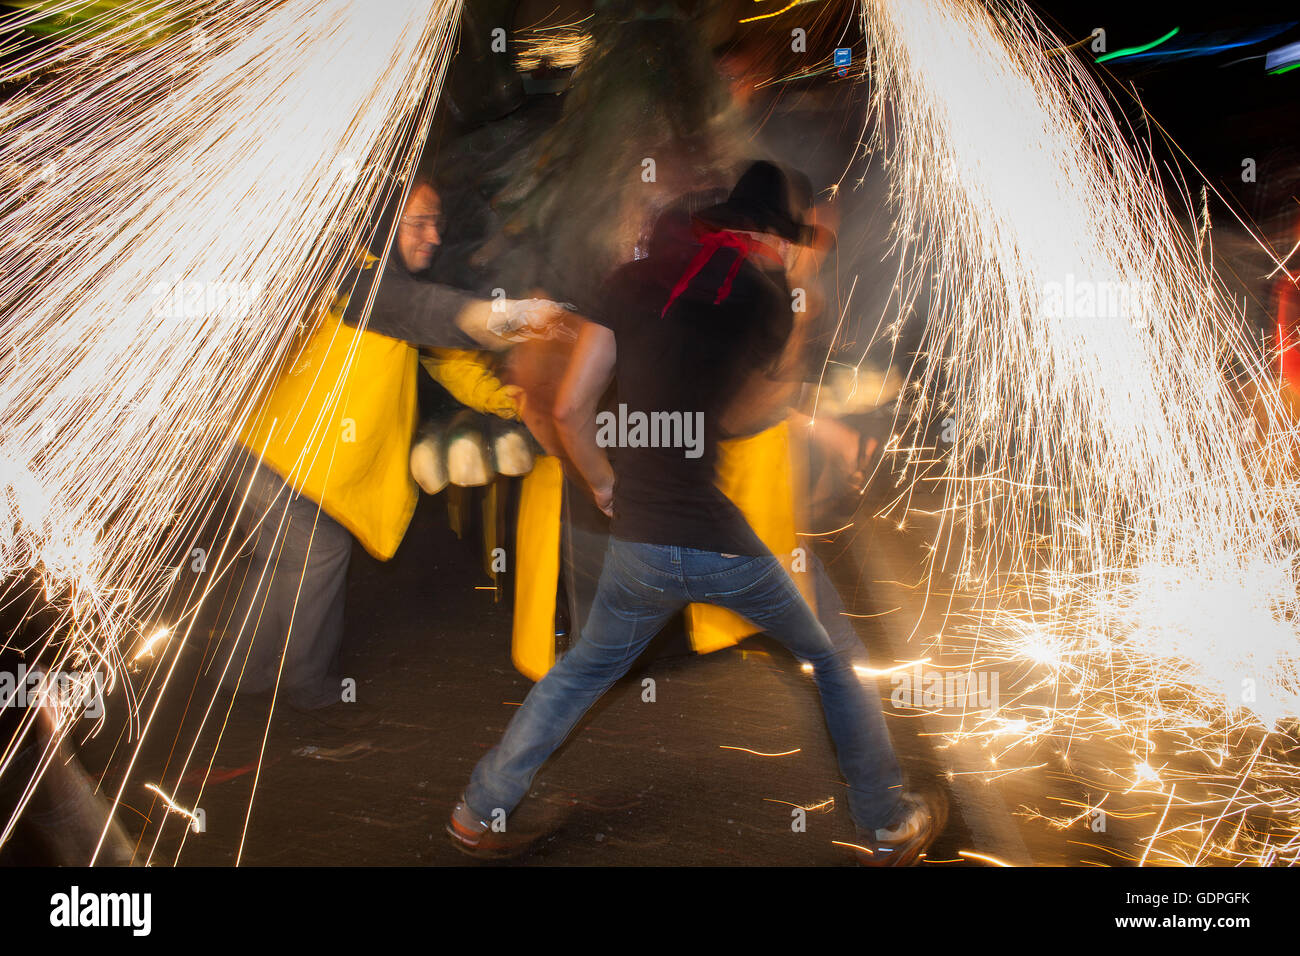 `Correfoc´, typical catalan celebration in which dragons and devils armed with fireworks dance through the streets. In Via Laiet Stock Photo